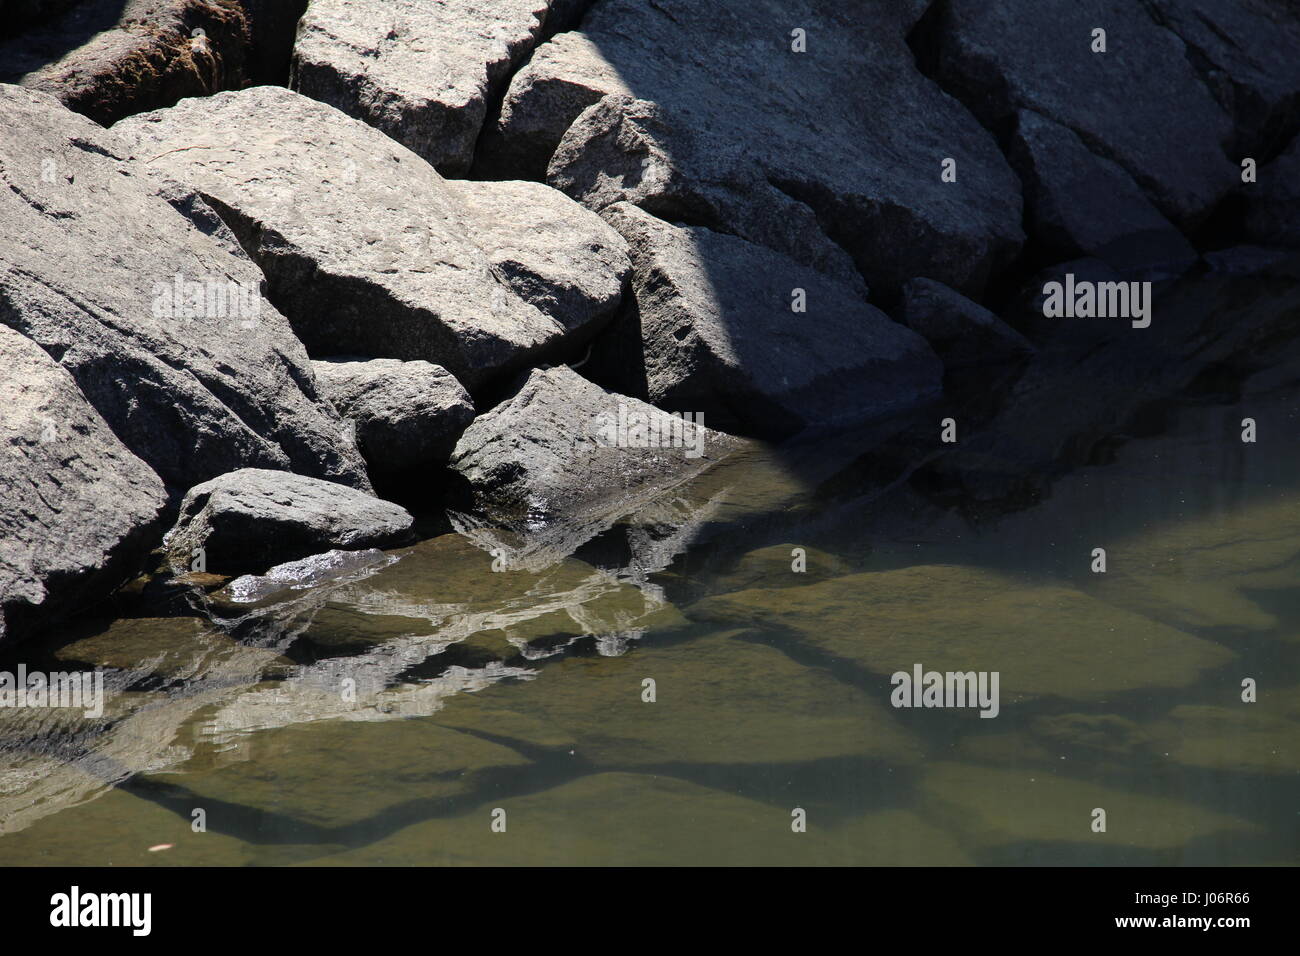 Stones from the harbour of Barca de Alva on the Douro river (Portugal) Stock Photo